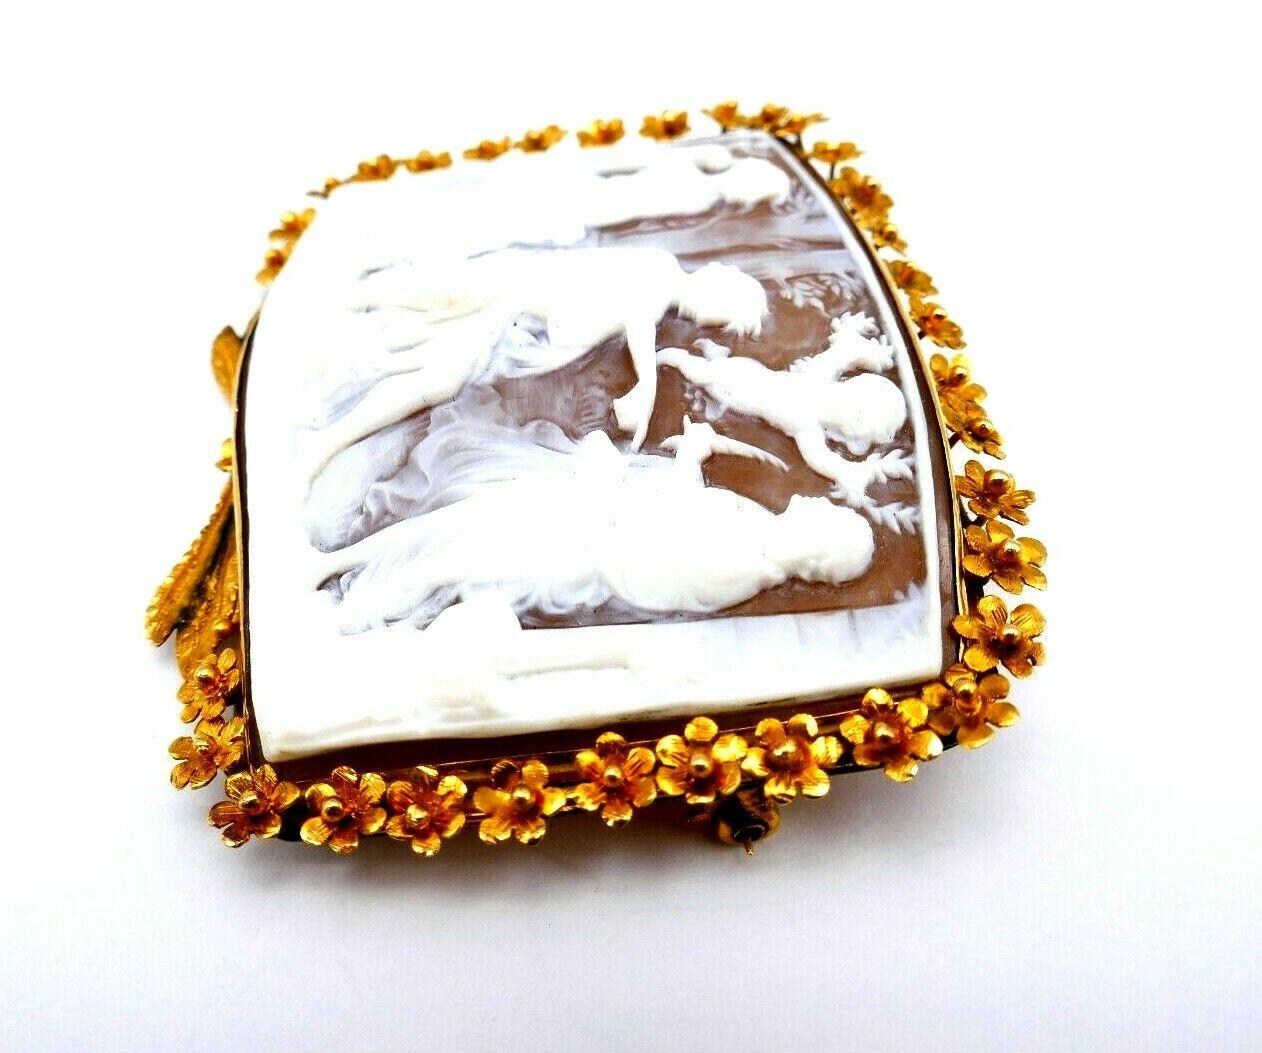 An amazing antique cameo brooch featuring a nicely carved Greek mythology scene. The frame is made of 14k gold (tested).
Measurements: 1 3/4